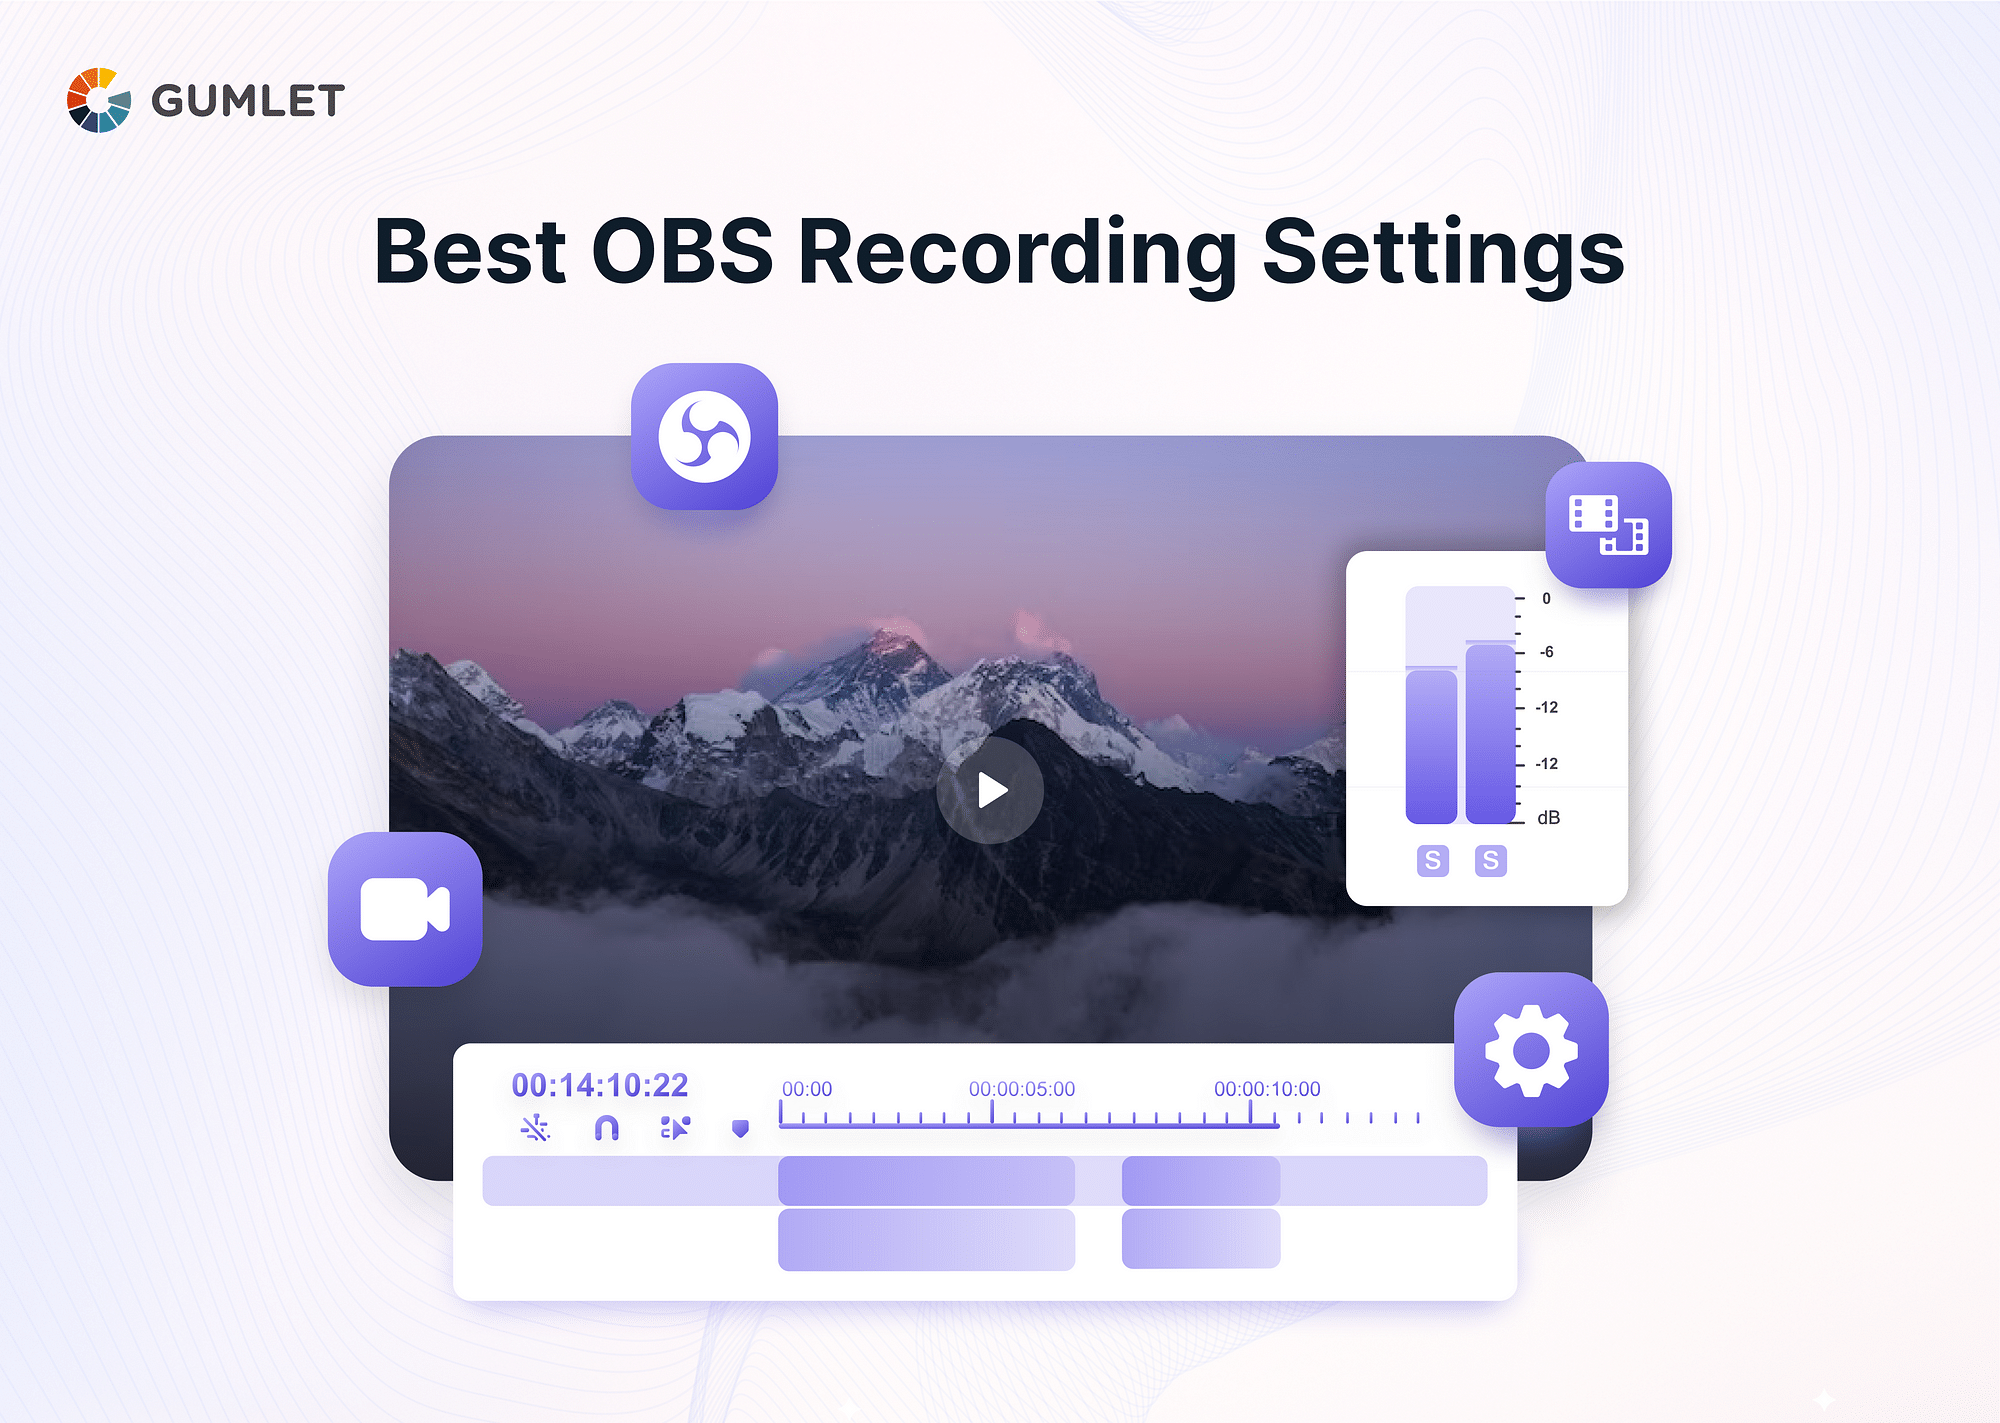 Best OBS Recording Settings for High-Quality Videos